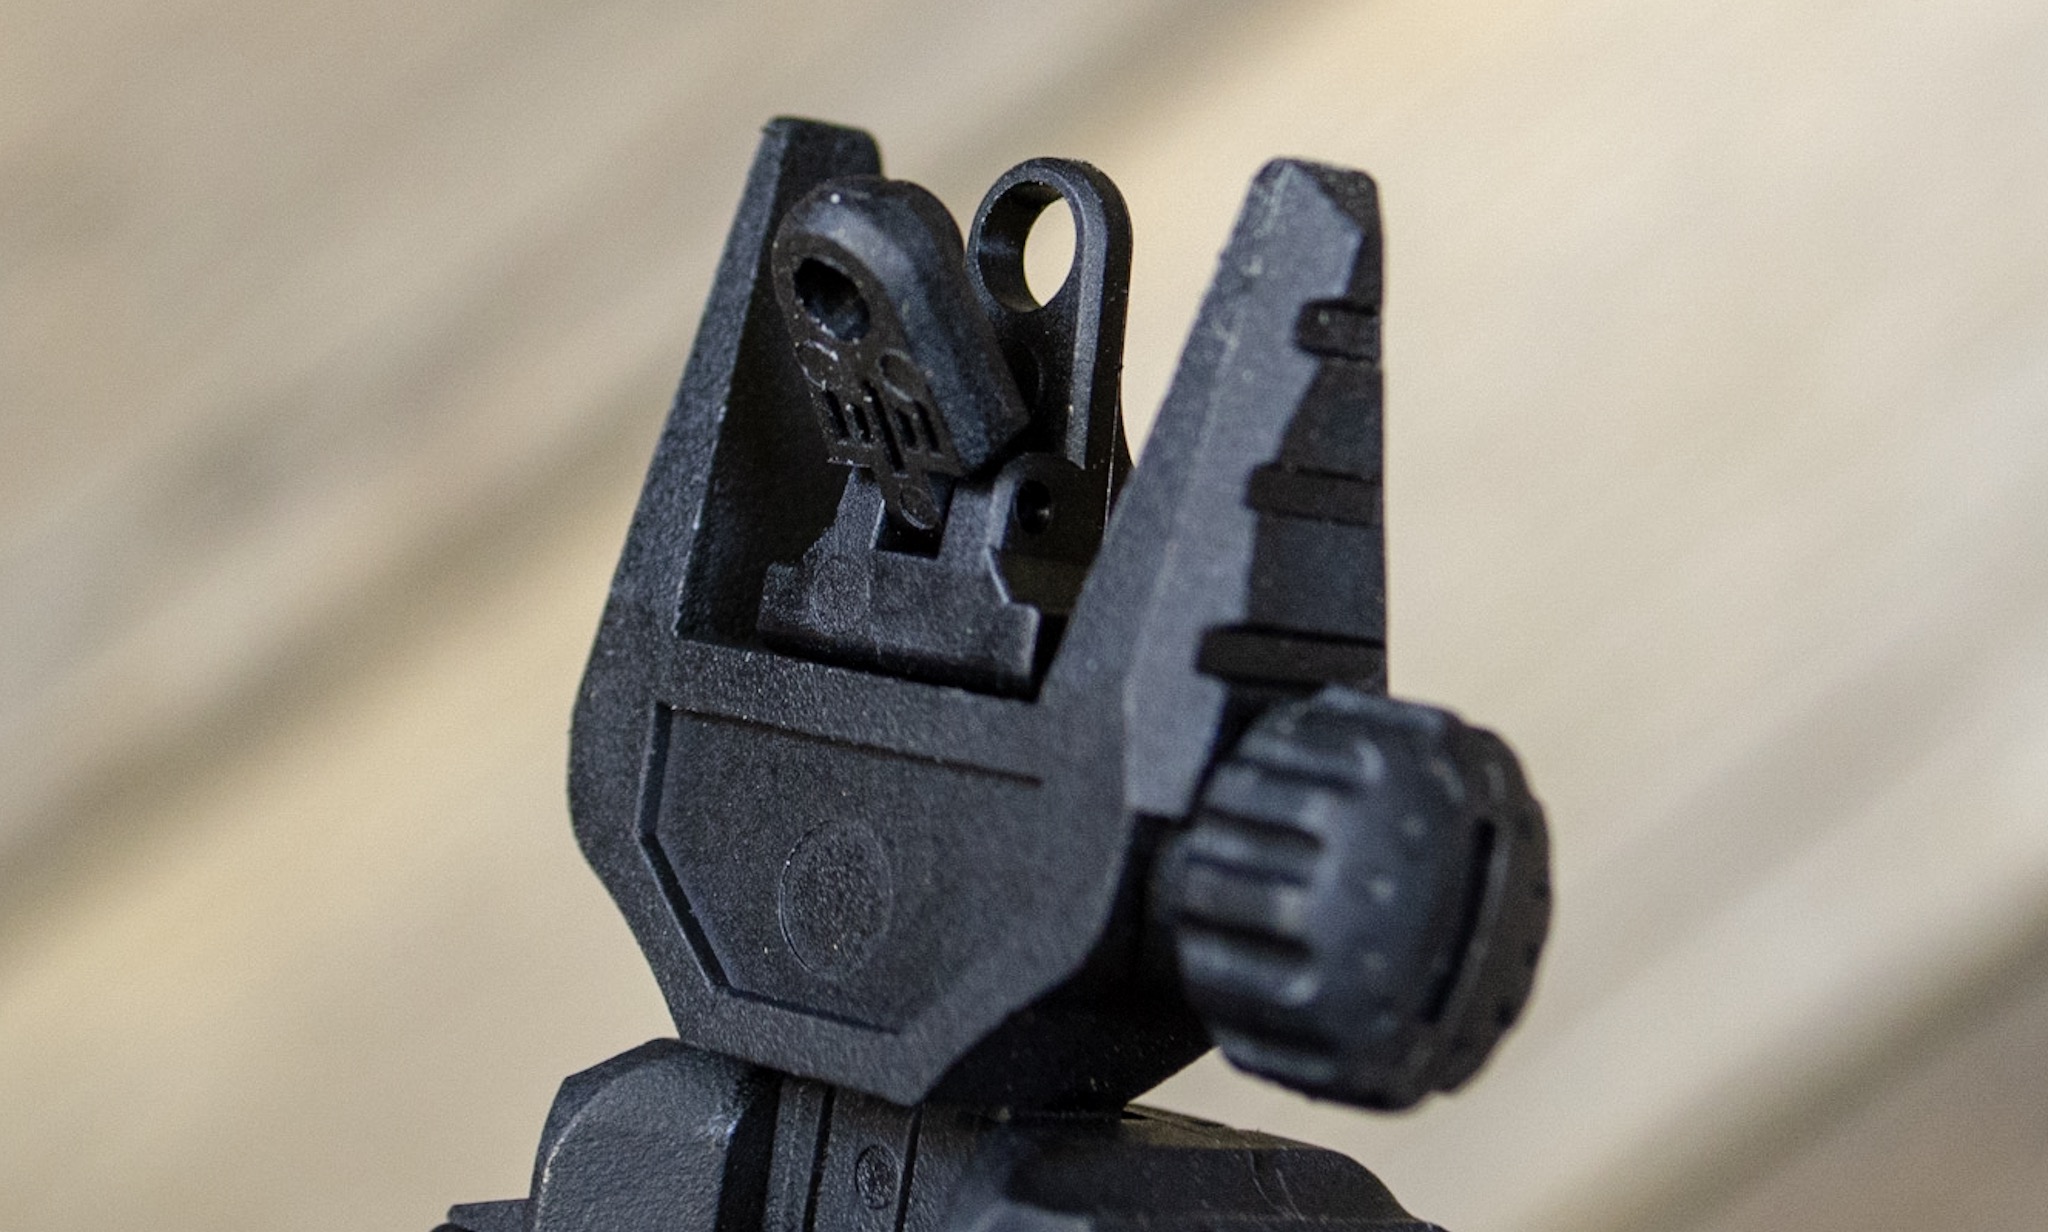 The rear sight has a "flip" feature that allows you to choose large or small aperture.